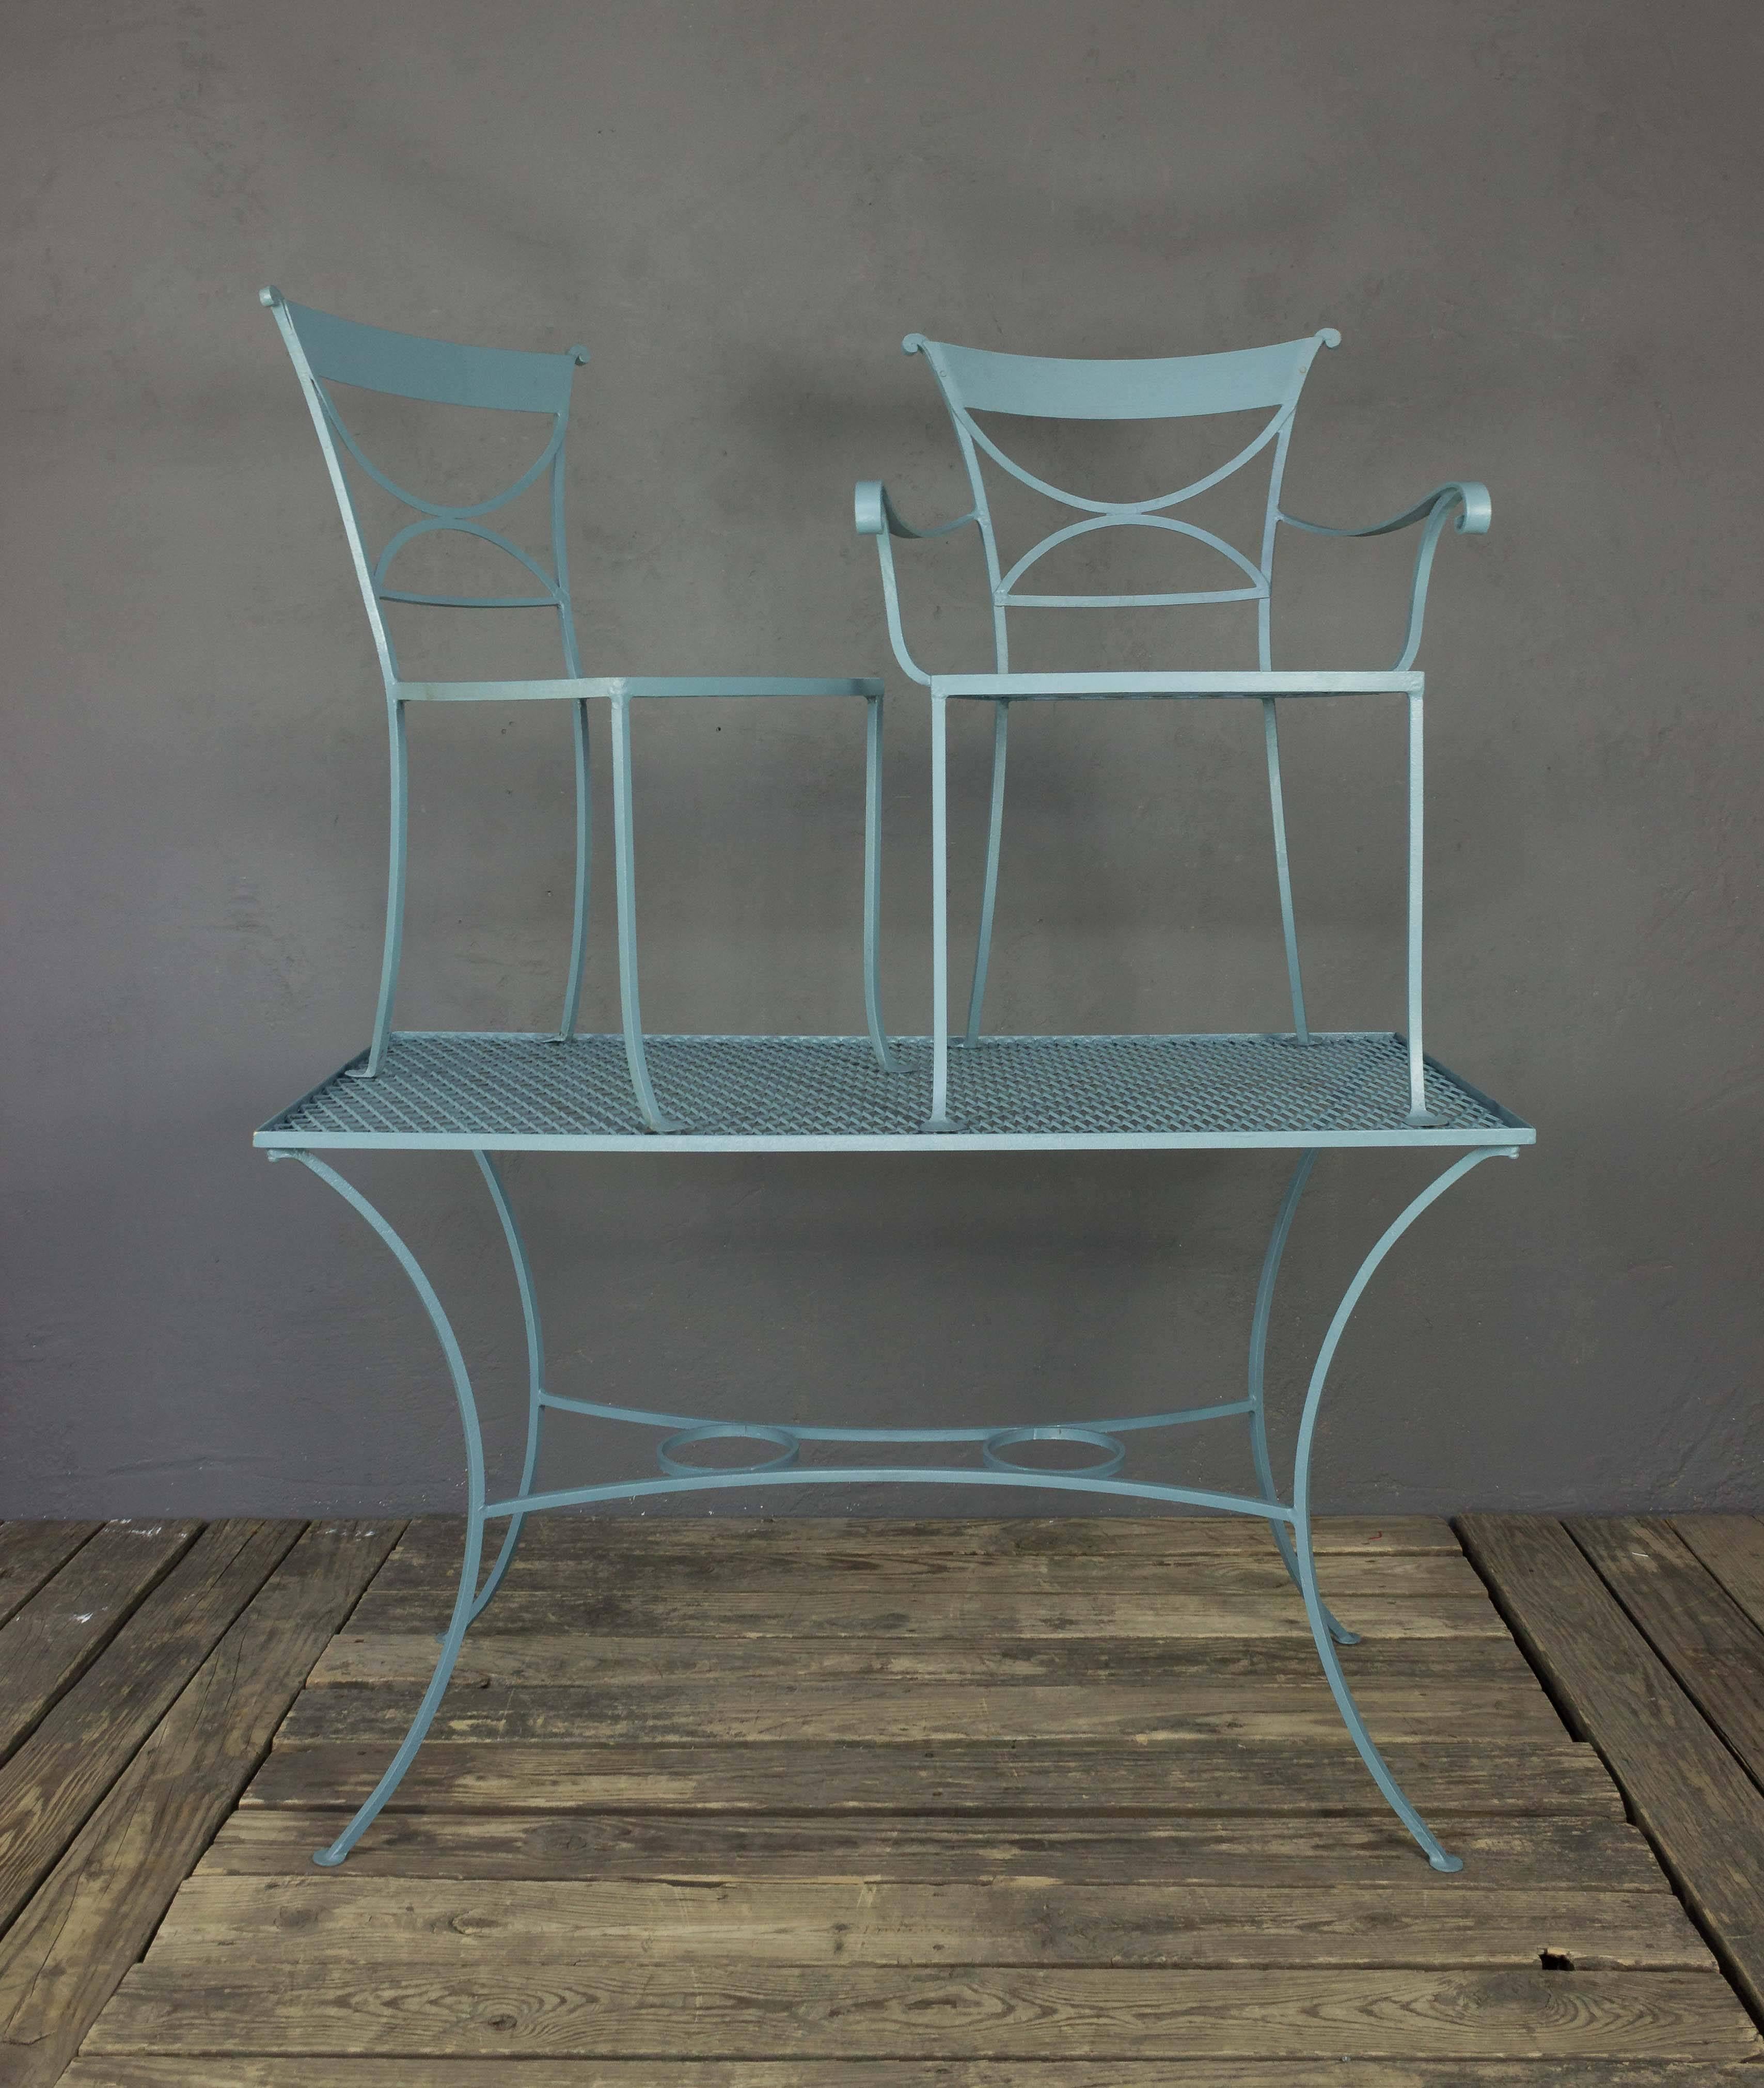 Mid-Century American, painted iron outdoor dining set composed of two armchairs, three side chairs and one table. This set has been updated with new wire mesh and fresh paint.

This price of this item has been reduced. This is the final net